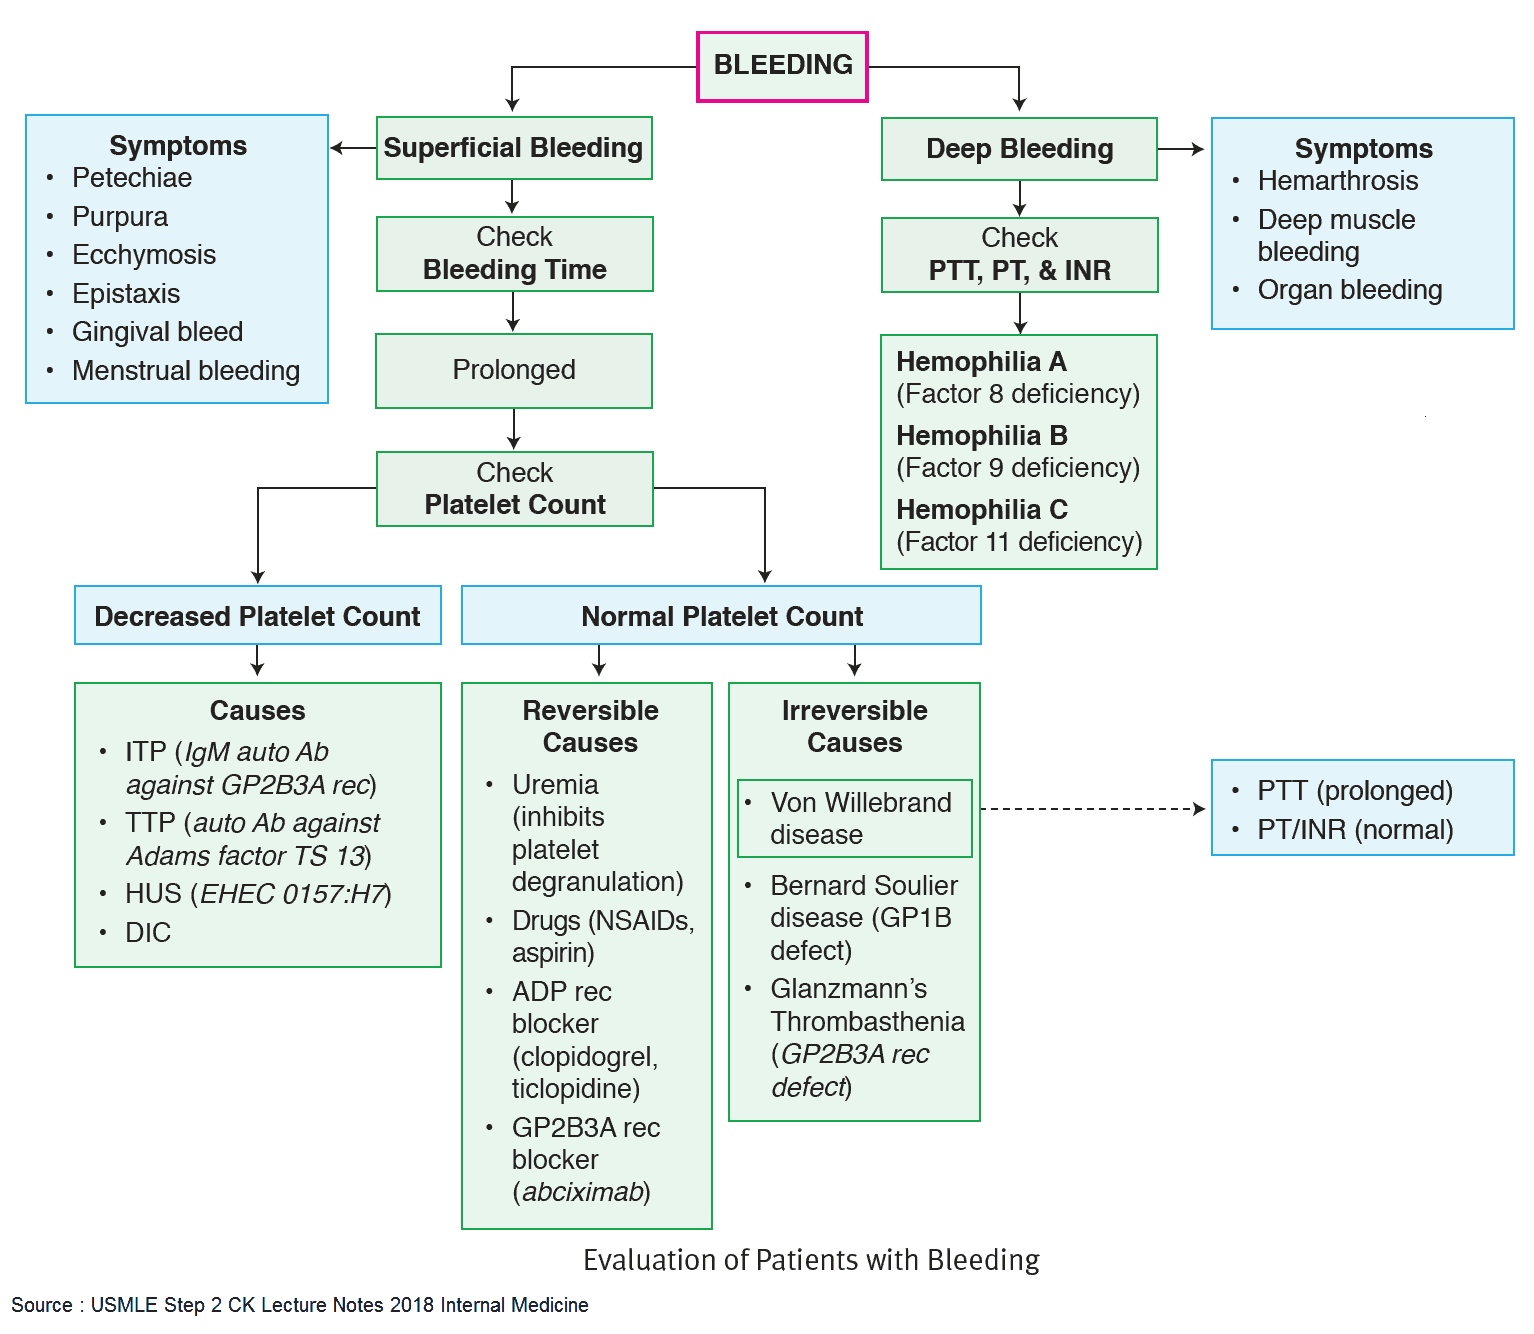 Evaluation of Patients with Bleeding